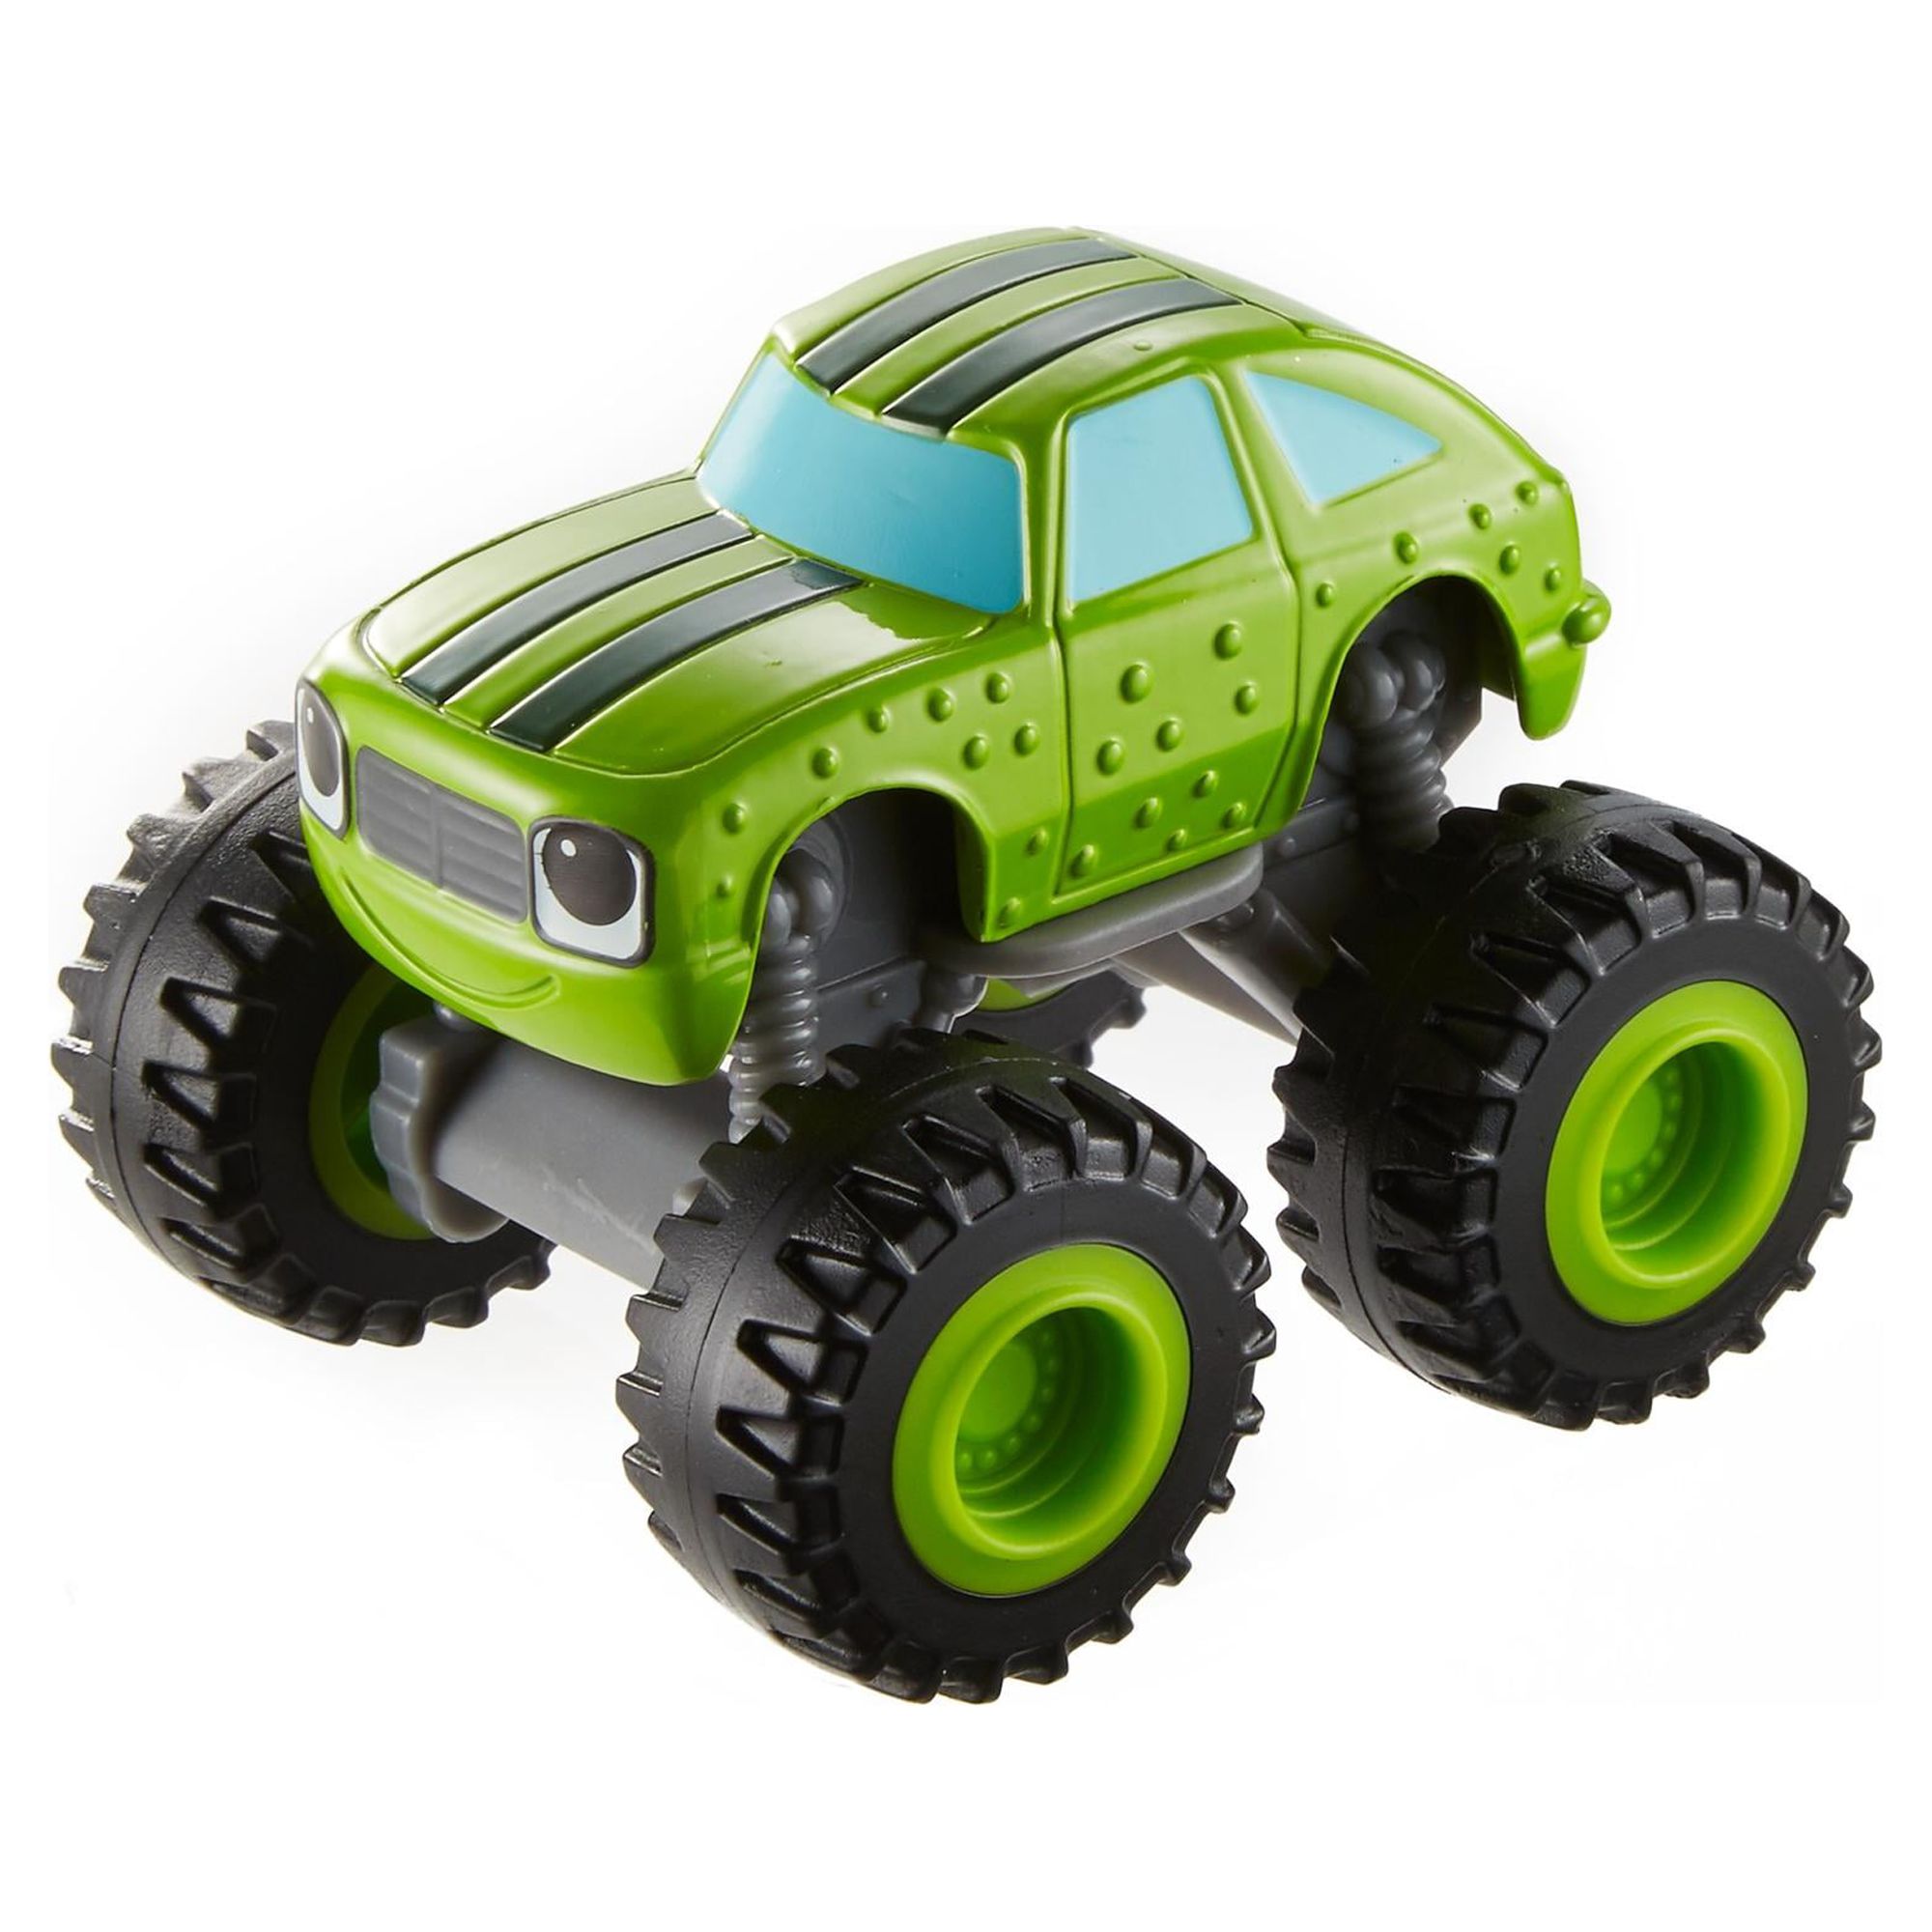 Nickelodeon Blaze and the Monster Machines Pickle Vehicle - image 1 of 3